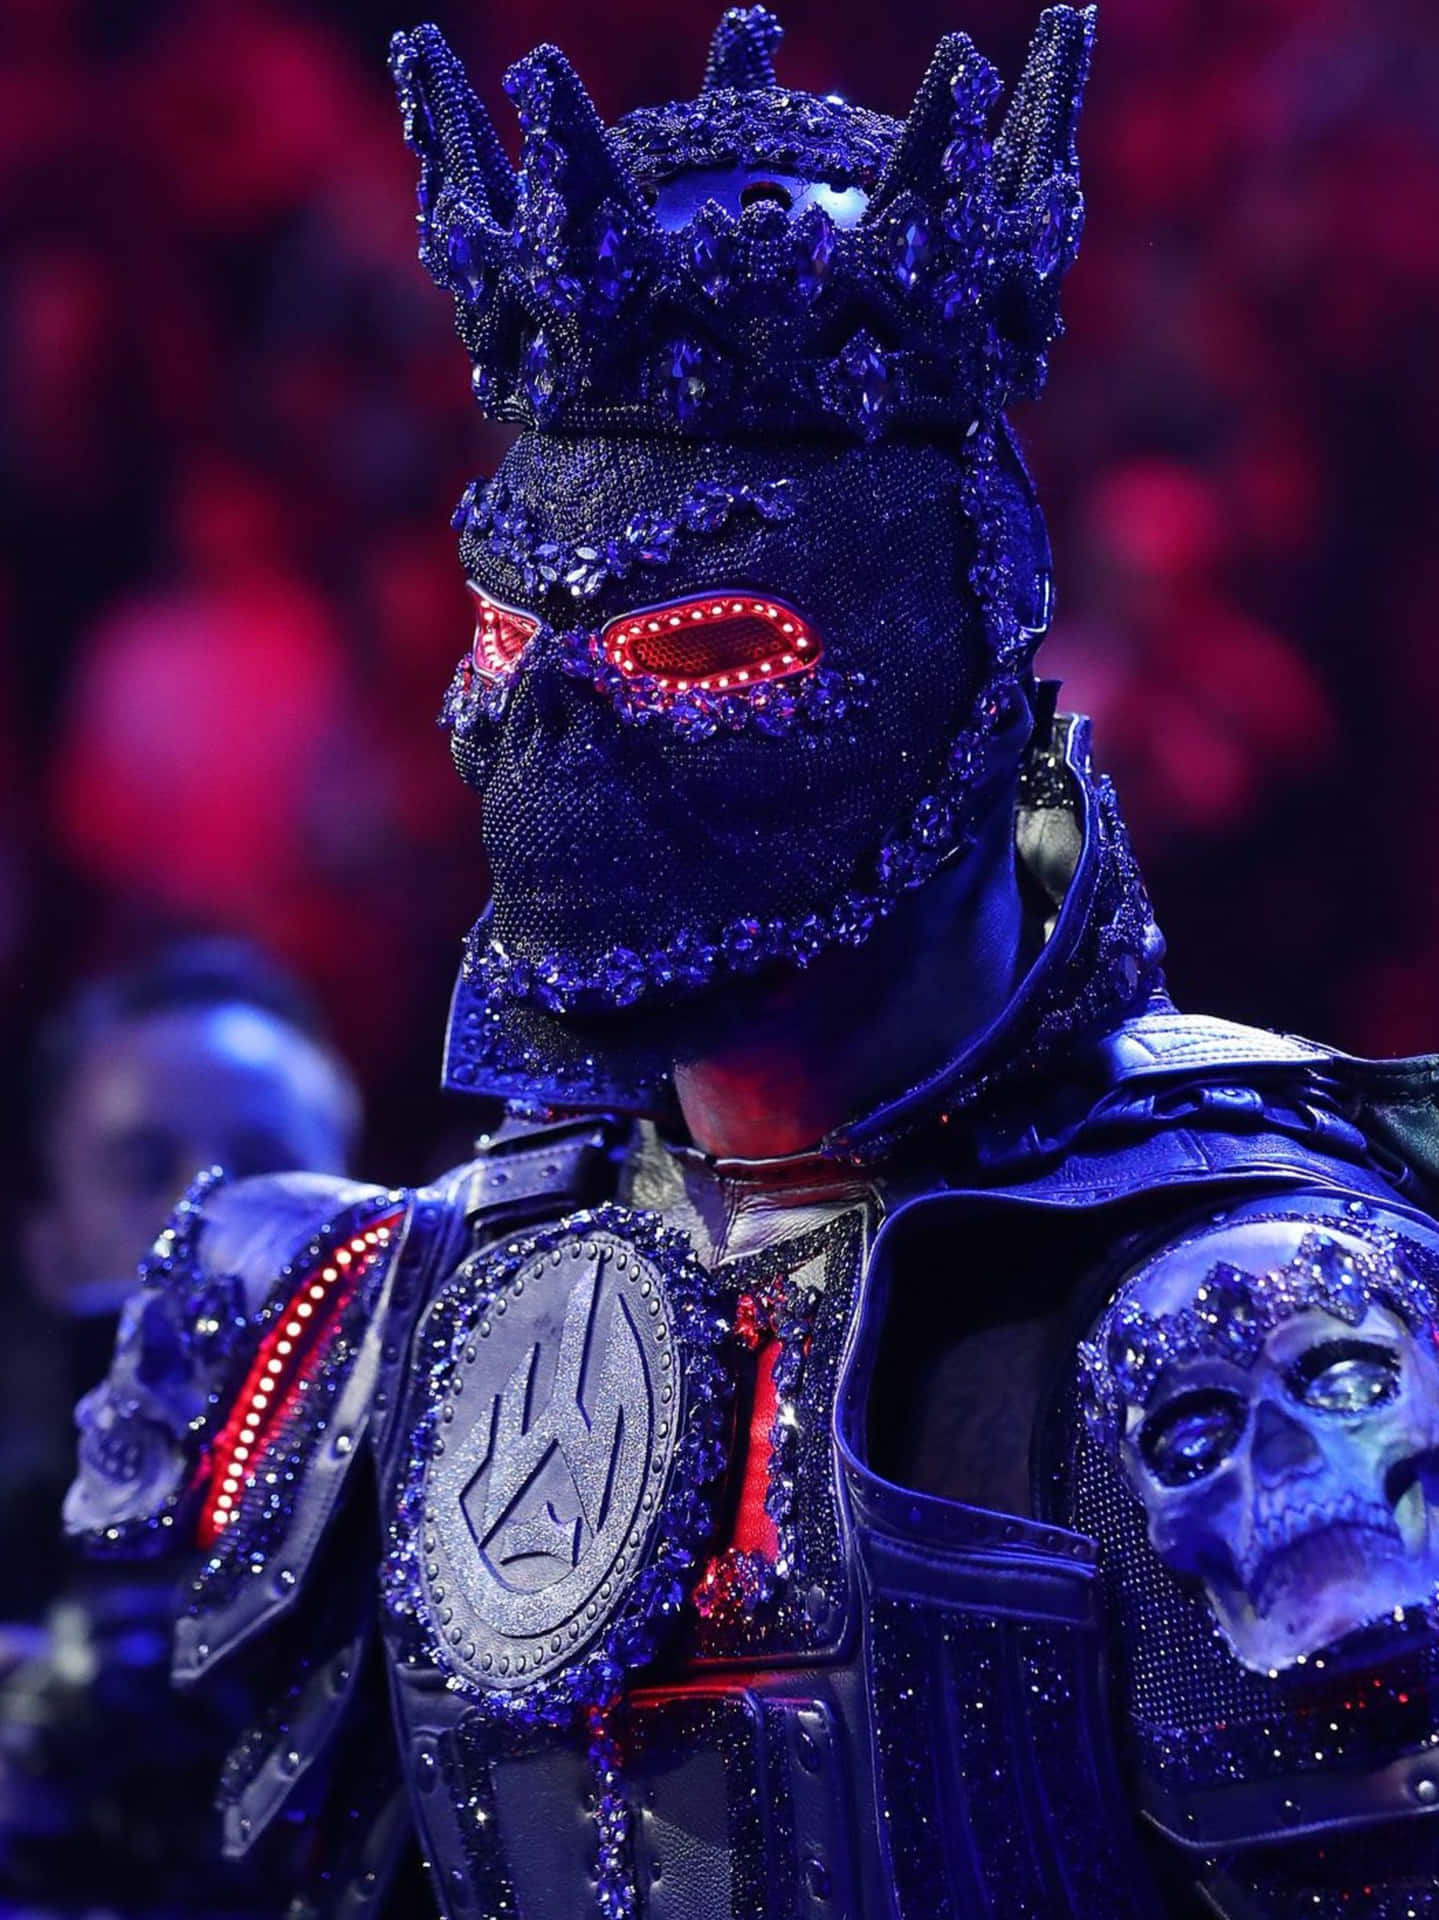 Deontay Wilder Boxing Entrance Costume Wallpaper